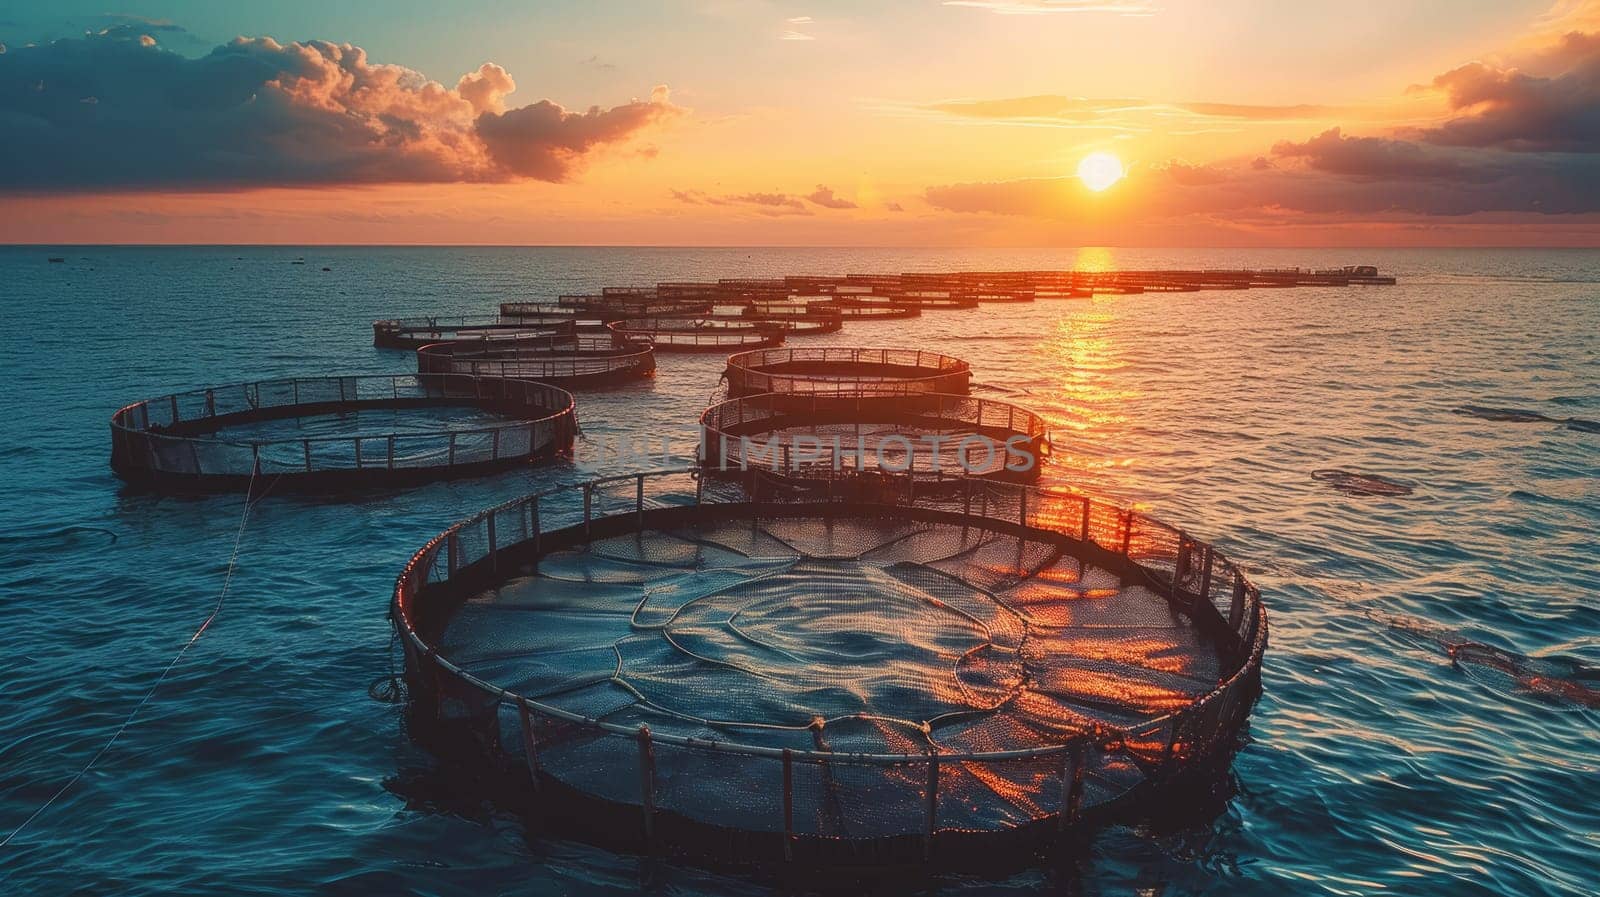 Sunset Over Ocean Fish Farm with Floating Cages for Salmon Aquaculture and Seafood Production by ailike